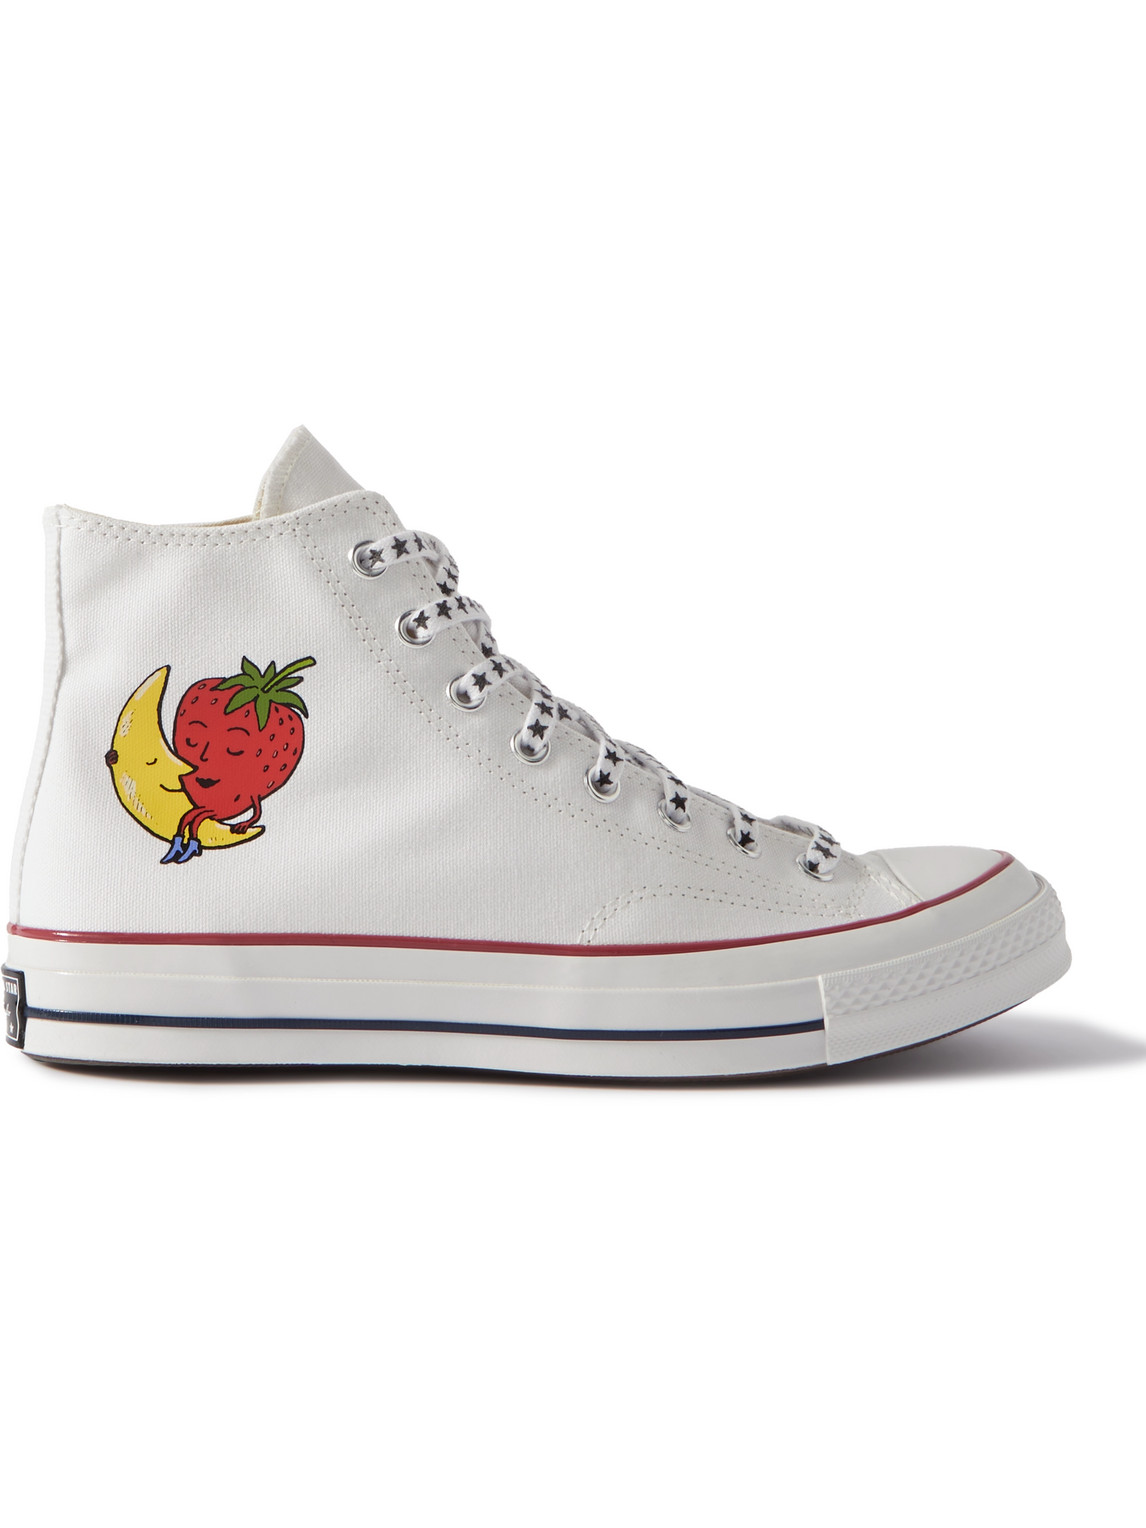 Converse Chuck 70 Printed Canvas High-Top Sneakers